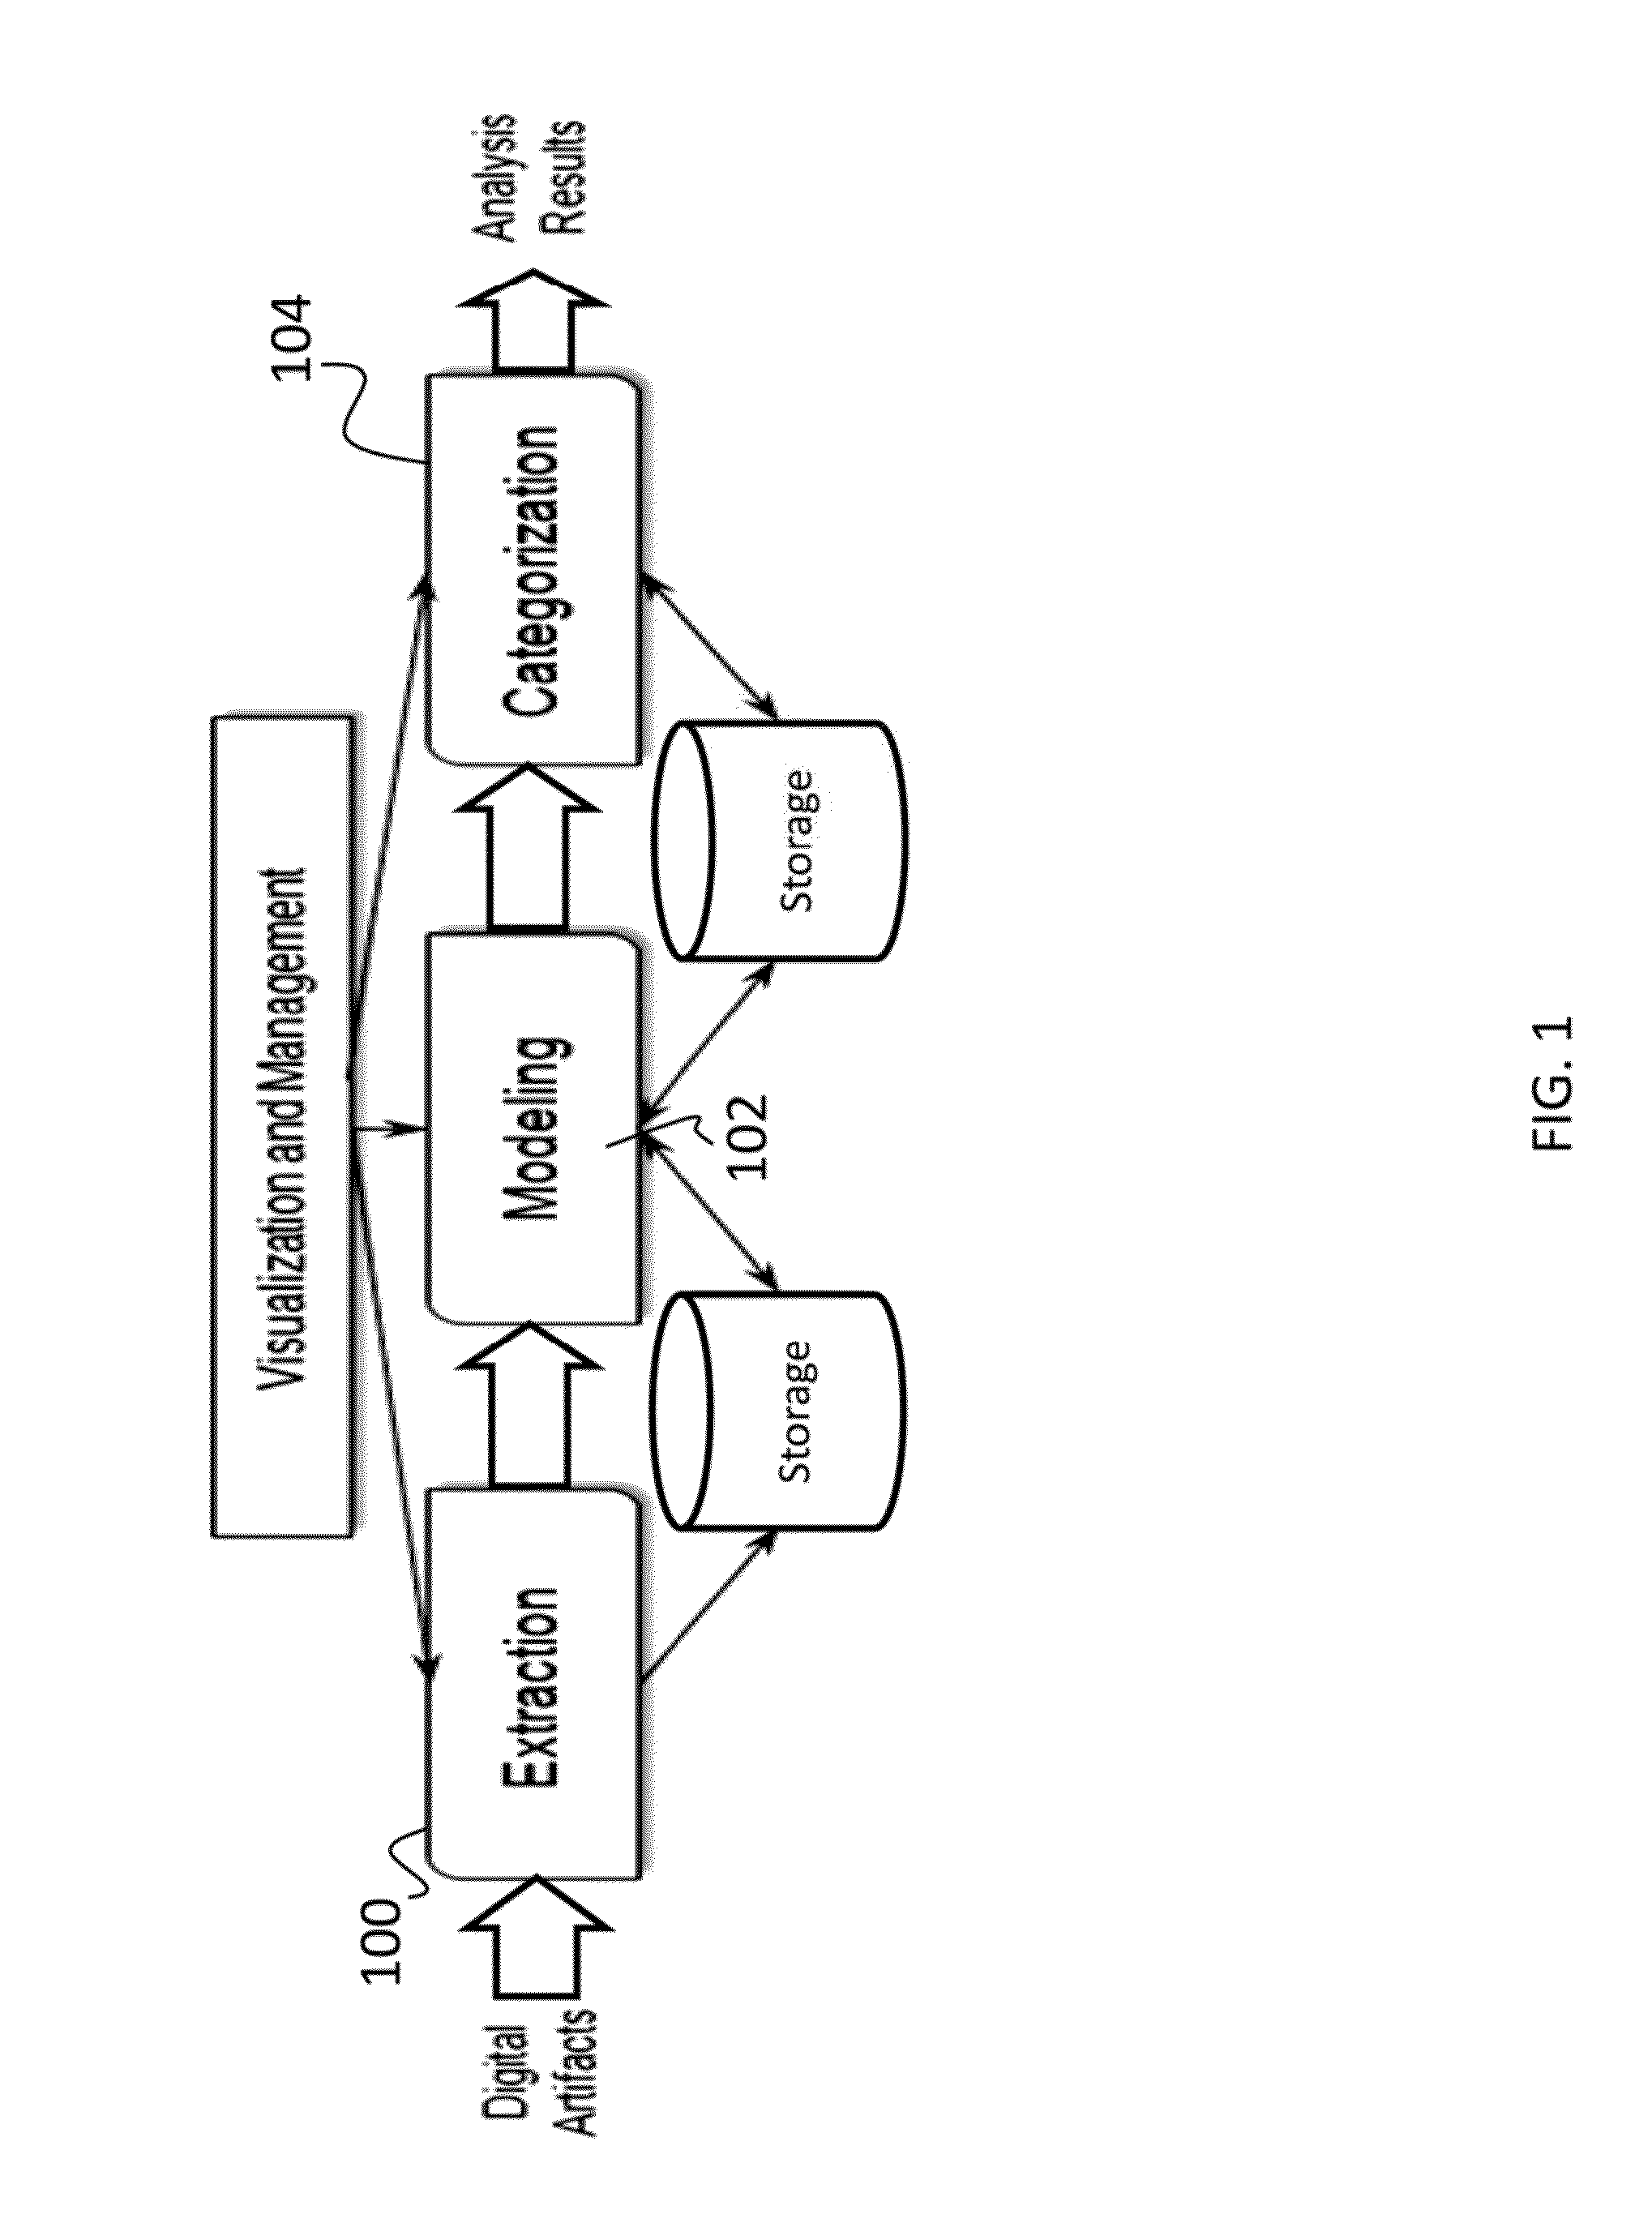 System and methods for digital artifact genetic modeling and forensic analysis